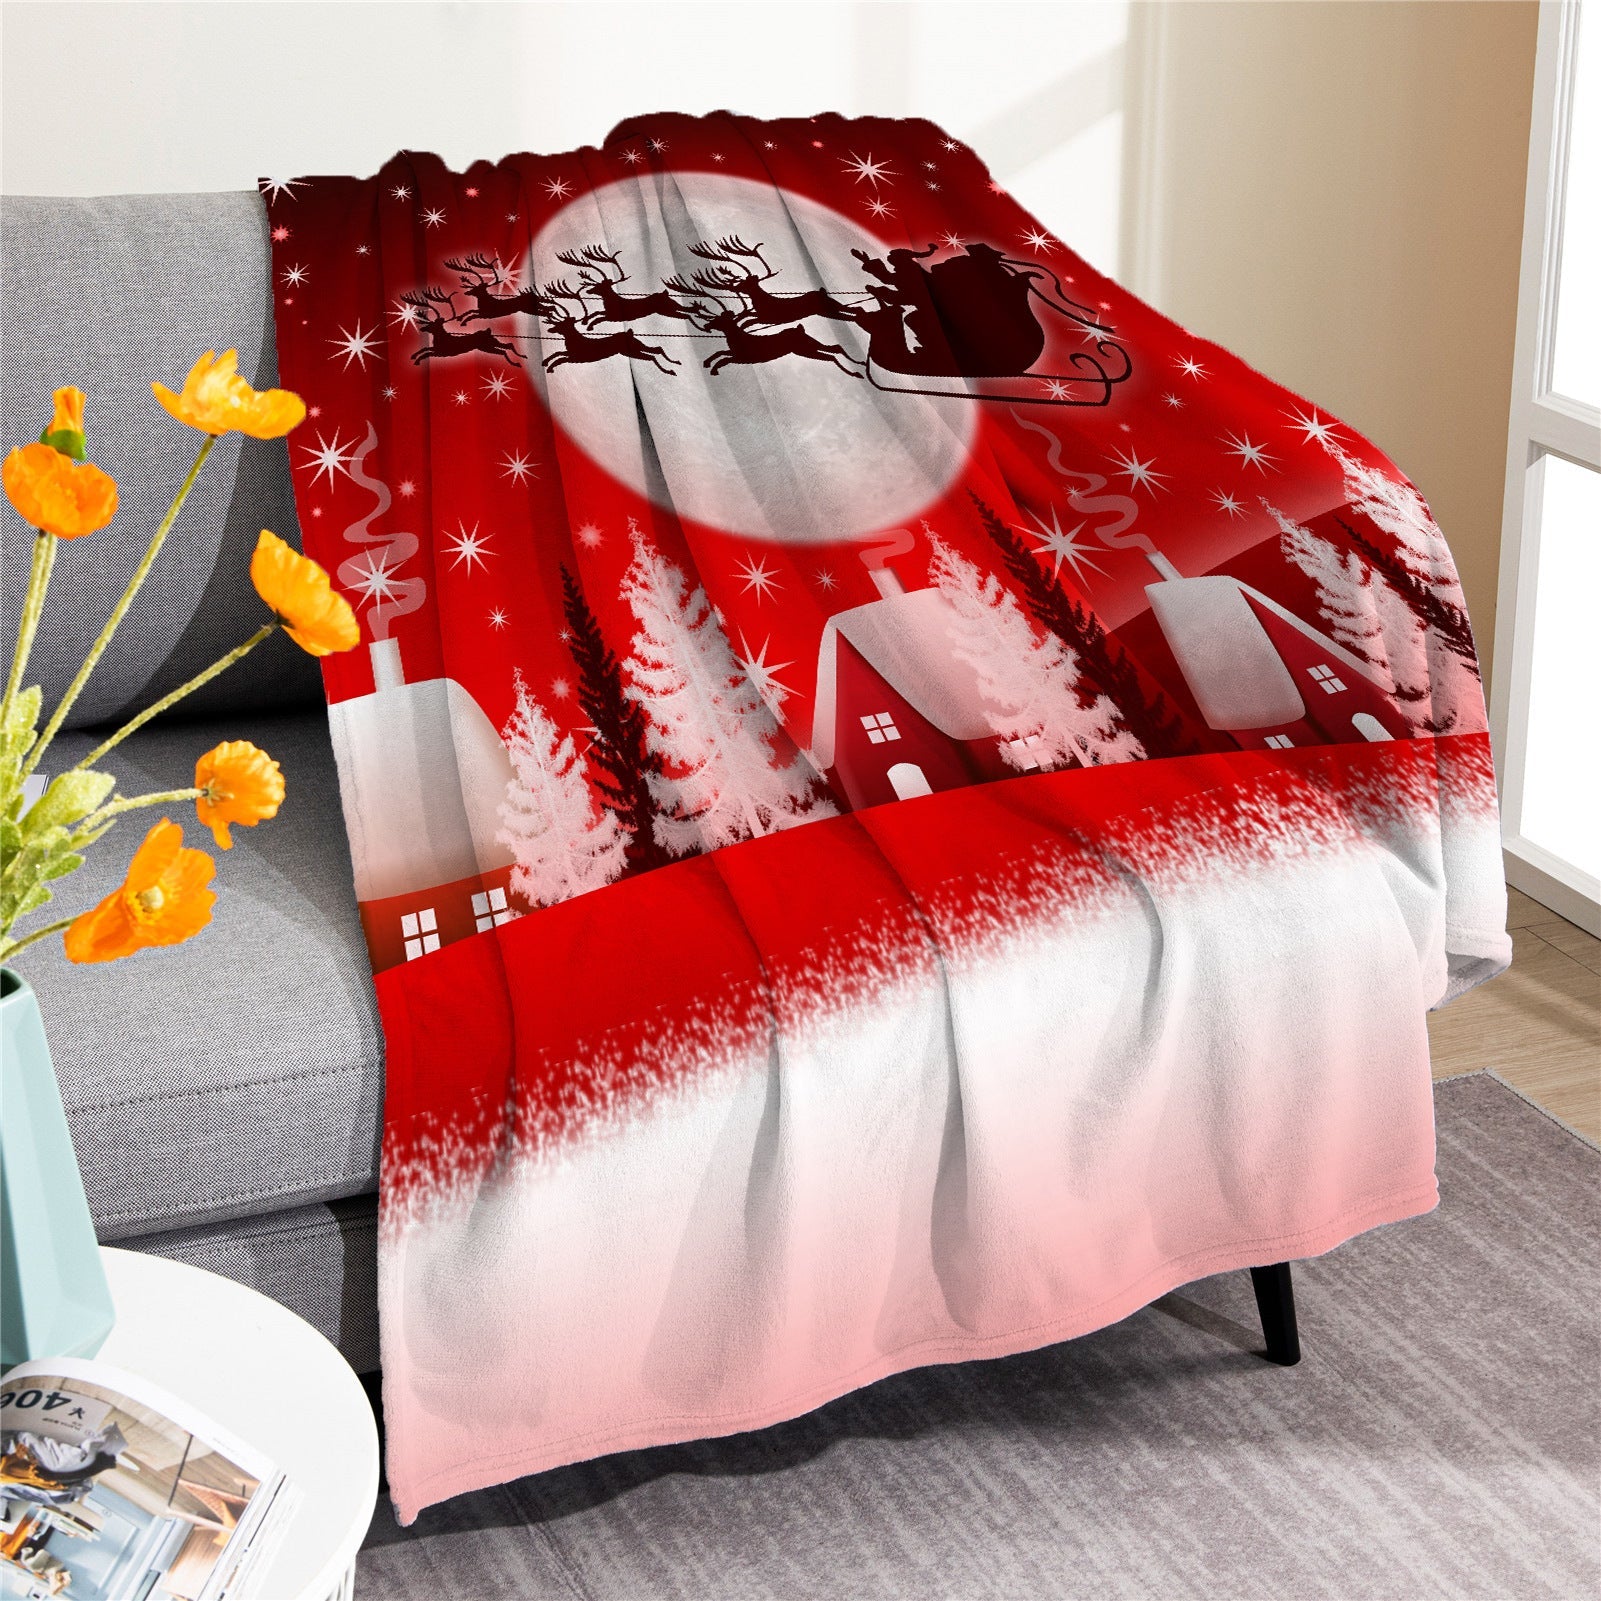 Merry Christmas Soft Fleece Throw Blankets-Blankets-M20220916-11-50*60 inches-Free Shipping at meselling99